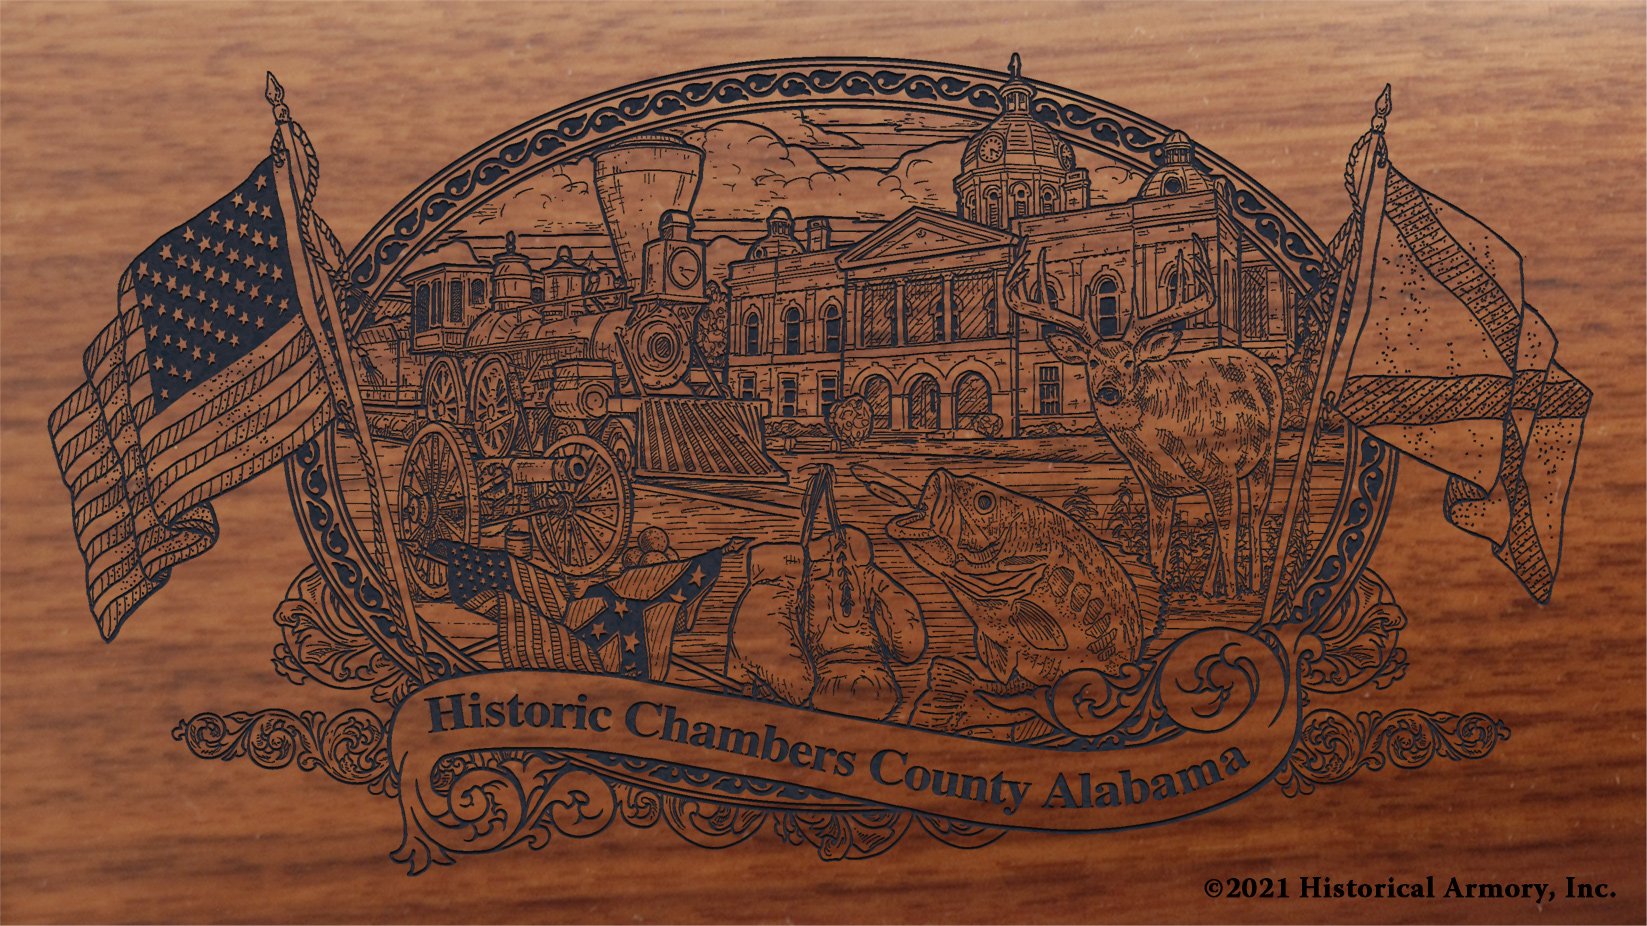 Engraved artwork | History of Chambers County Alabama | Historical Armory